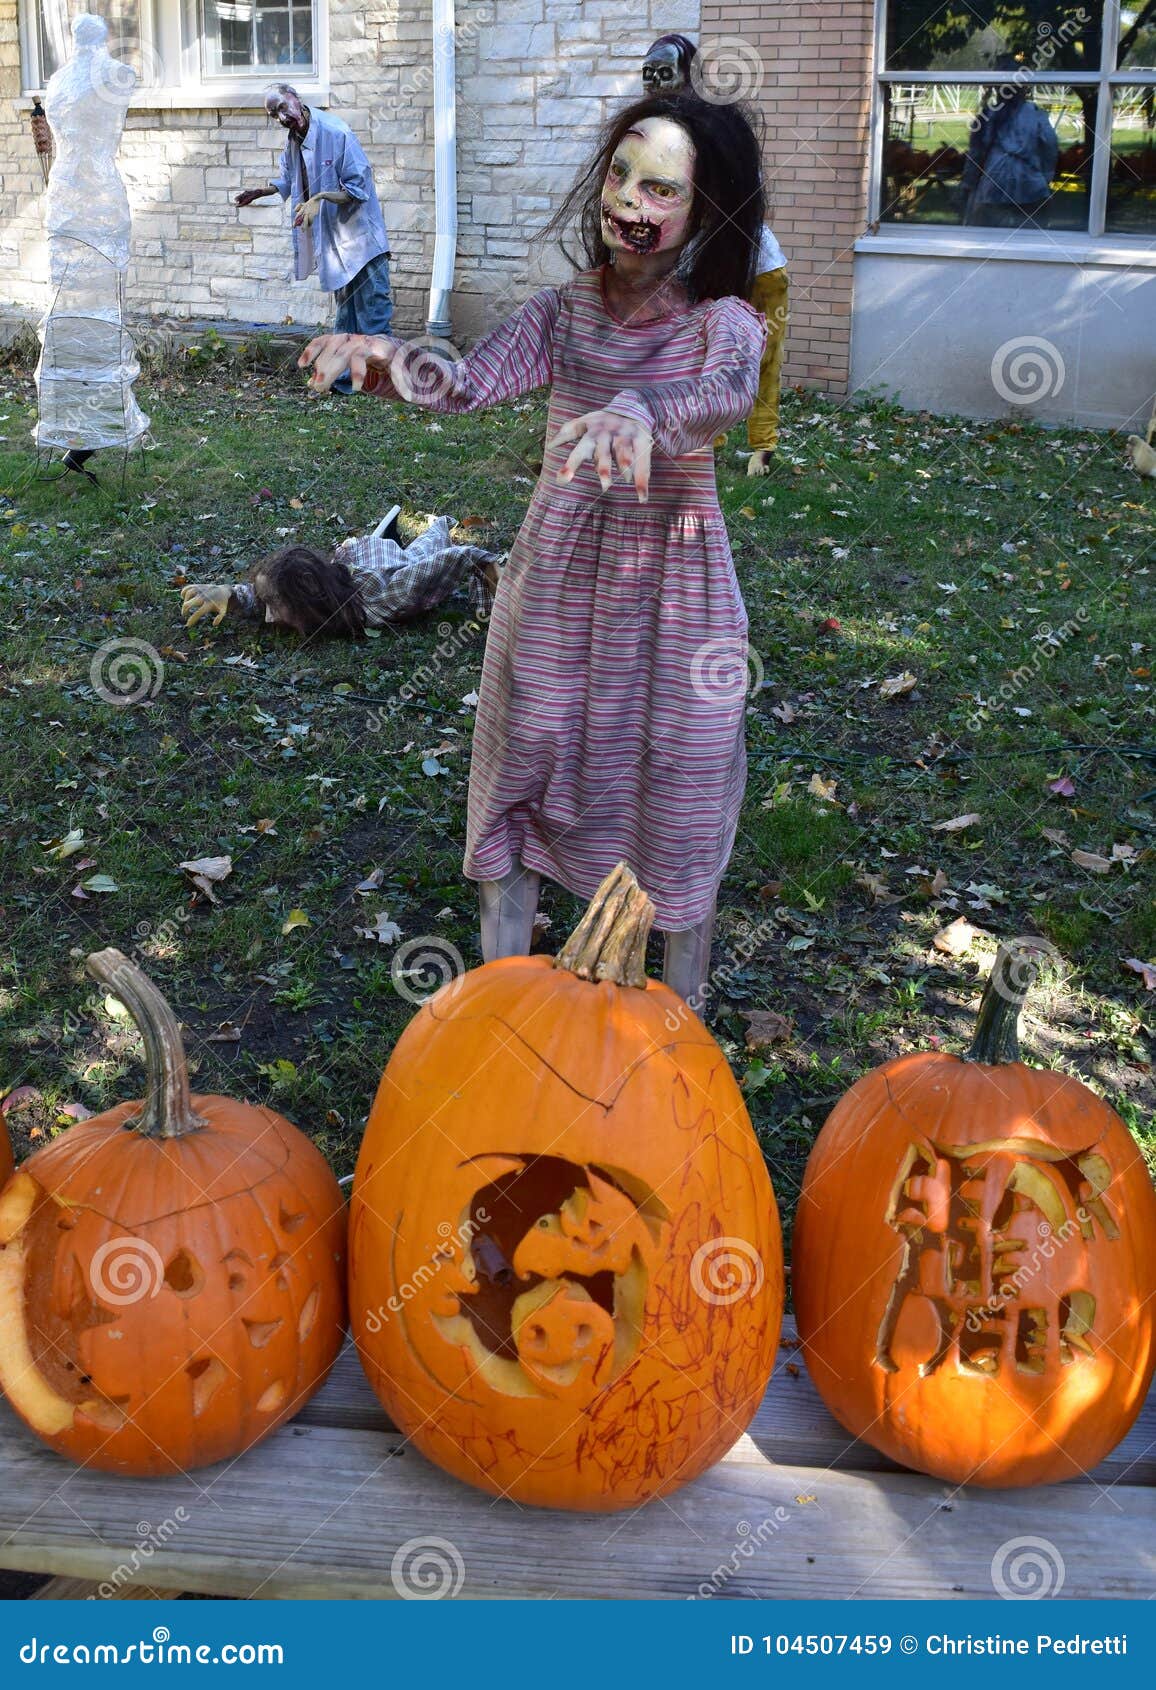 Scary Halloween Decoration on a Fall Day Stock Image - Image of ...